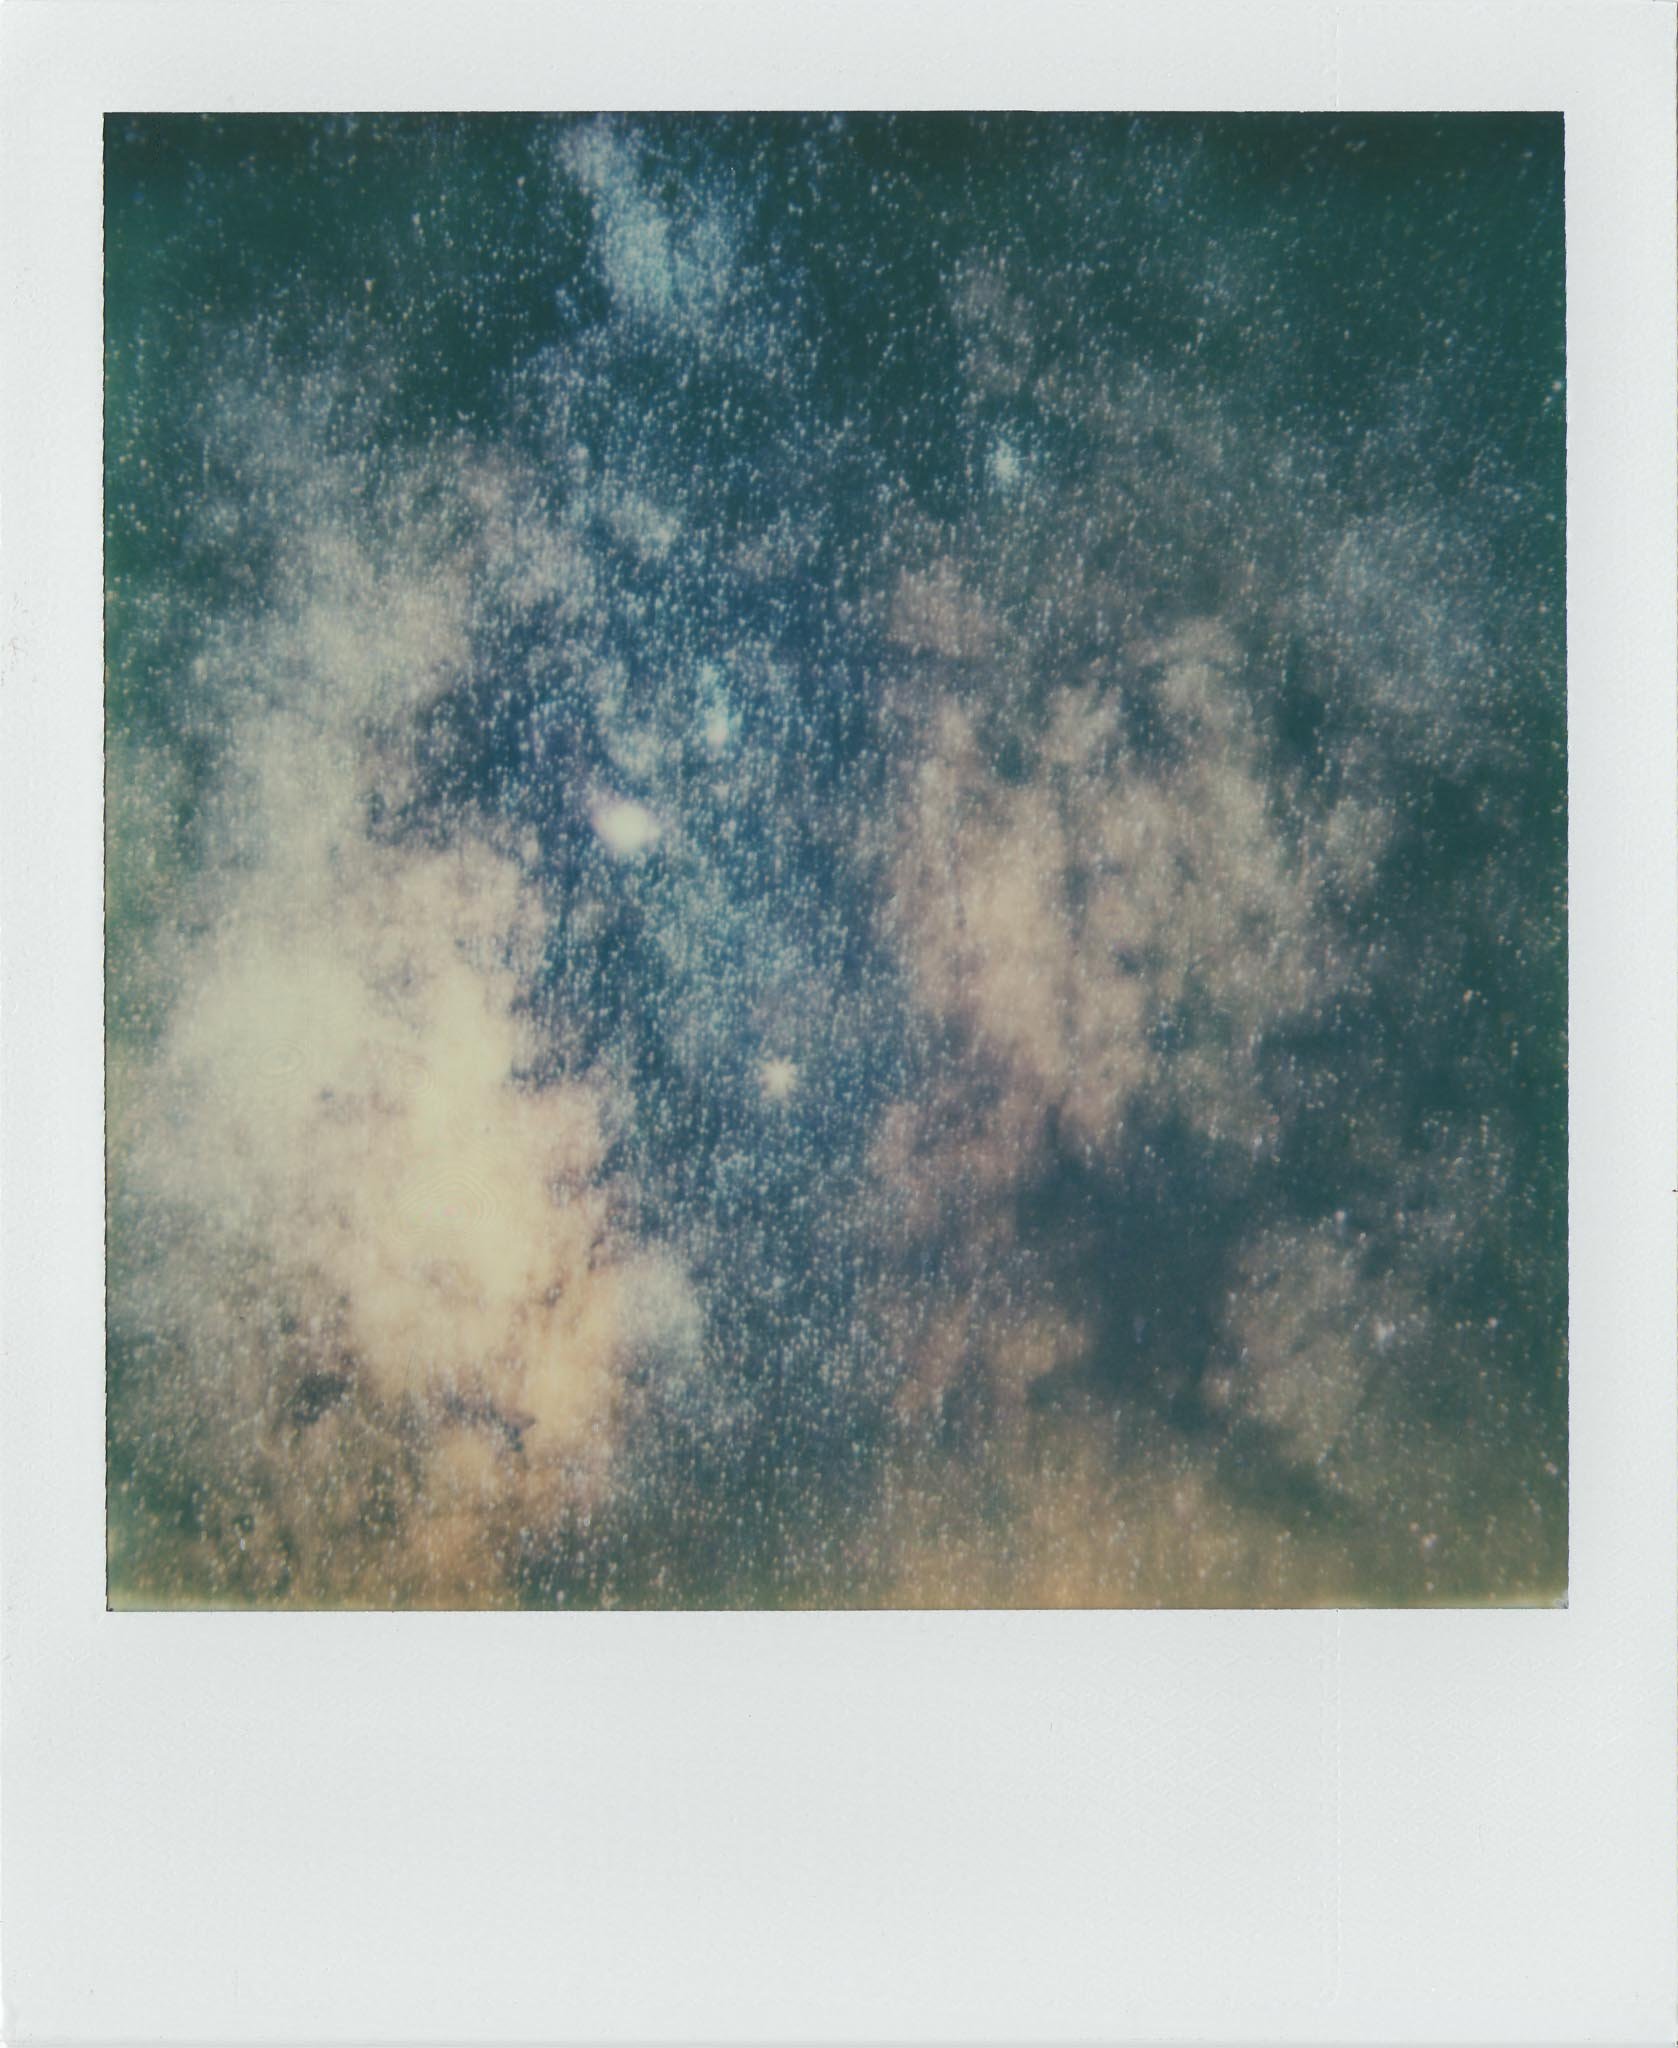 These Beautiful Images of the Milky Way Were Shot on Instant Film